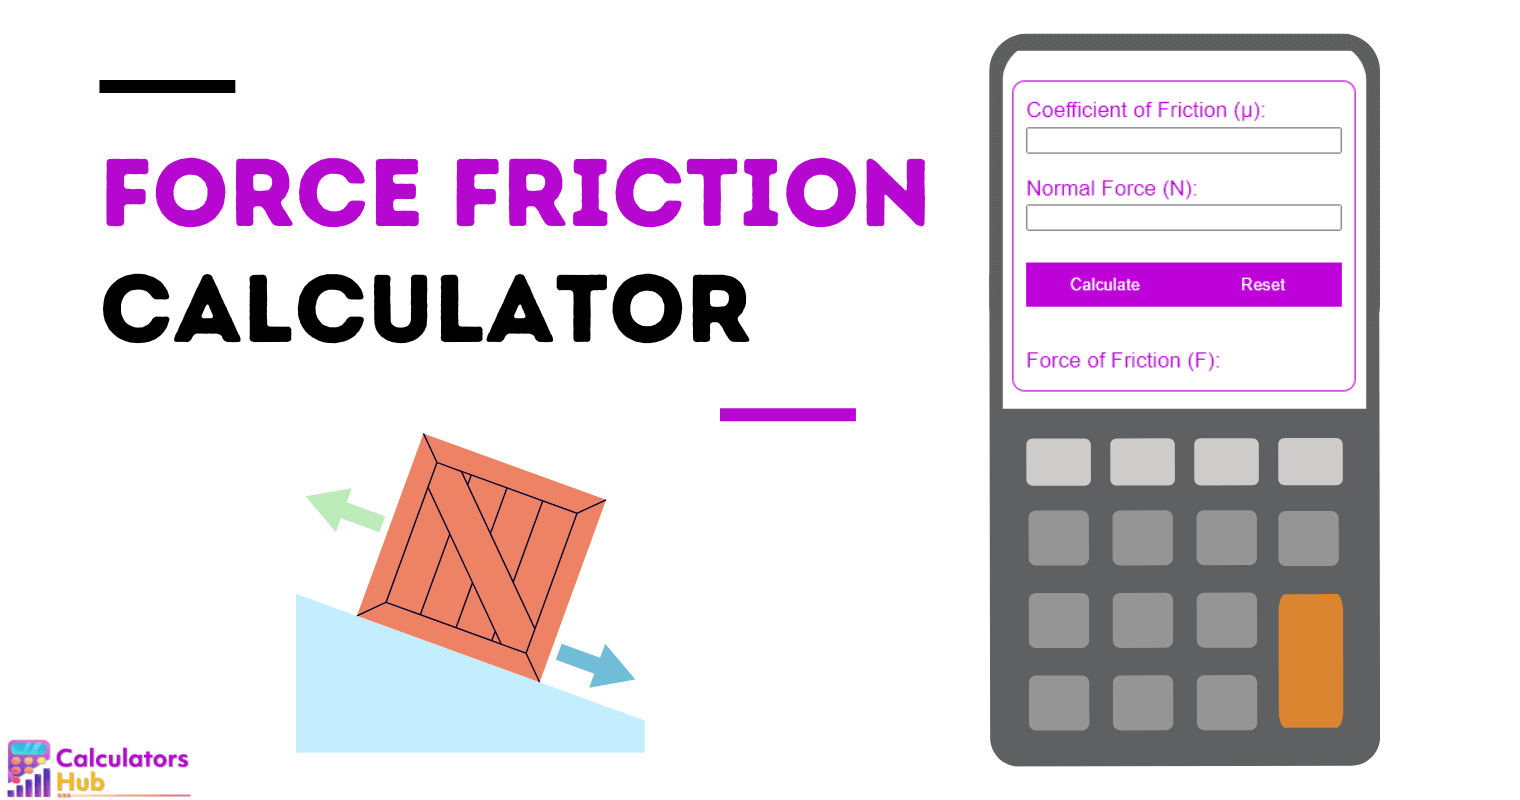 Force Friction Calculator